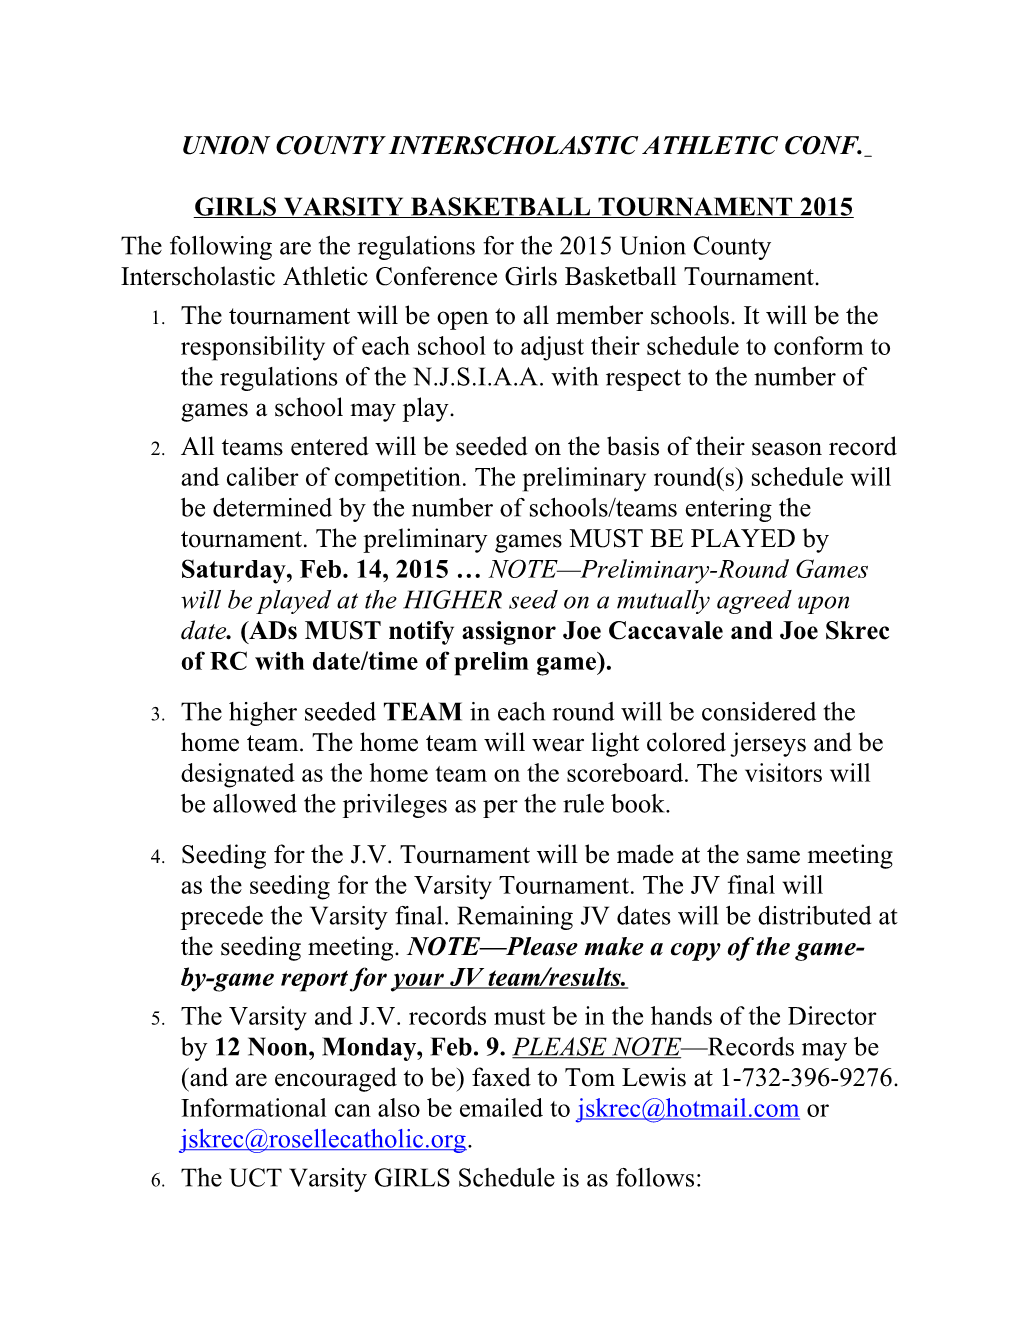 Union County Interscholastic Athletic Conf. Girls Varsity Basketball Tournament 2015